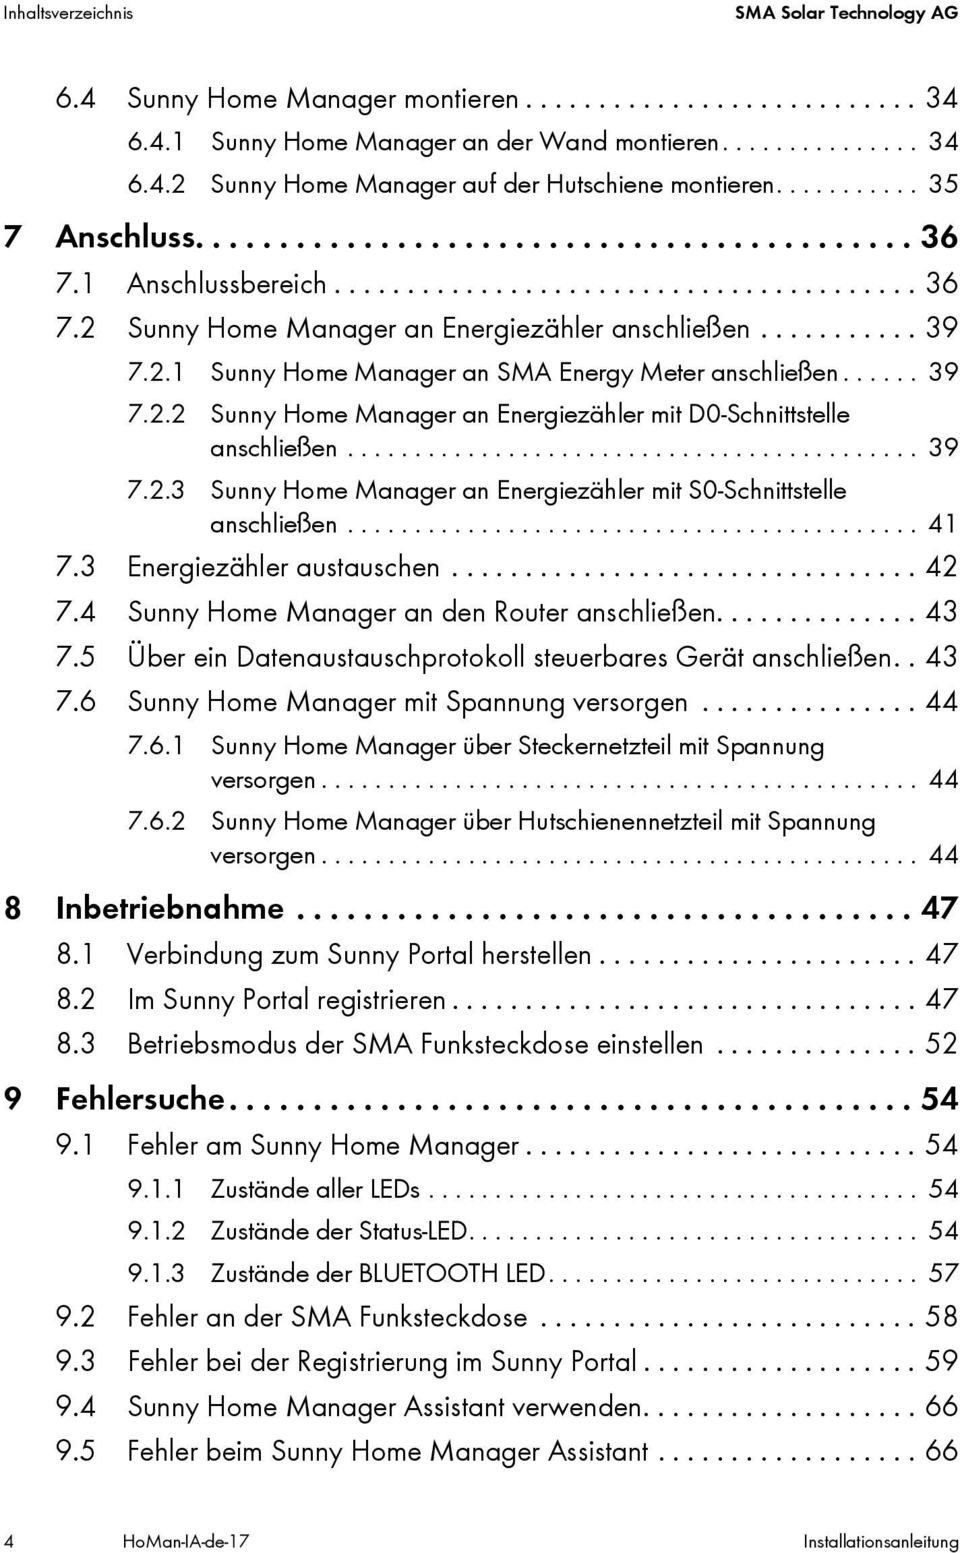 2.1 Sunny Home Manager an SMA Energy Meter anschließen...... 39 7.2.2 Sunny Home Manager an Energiezähler mit D0-Schnittstelle anschließen........................................... 39 7.2.3 Sunny Home Manager an Energiezähler mit S0-Schnittstelle anschließen.